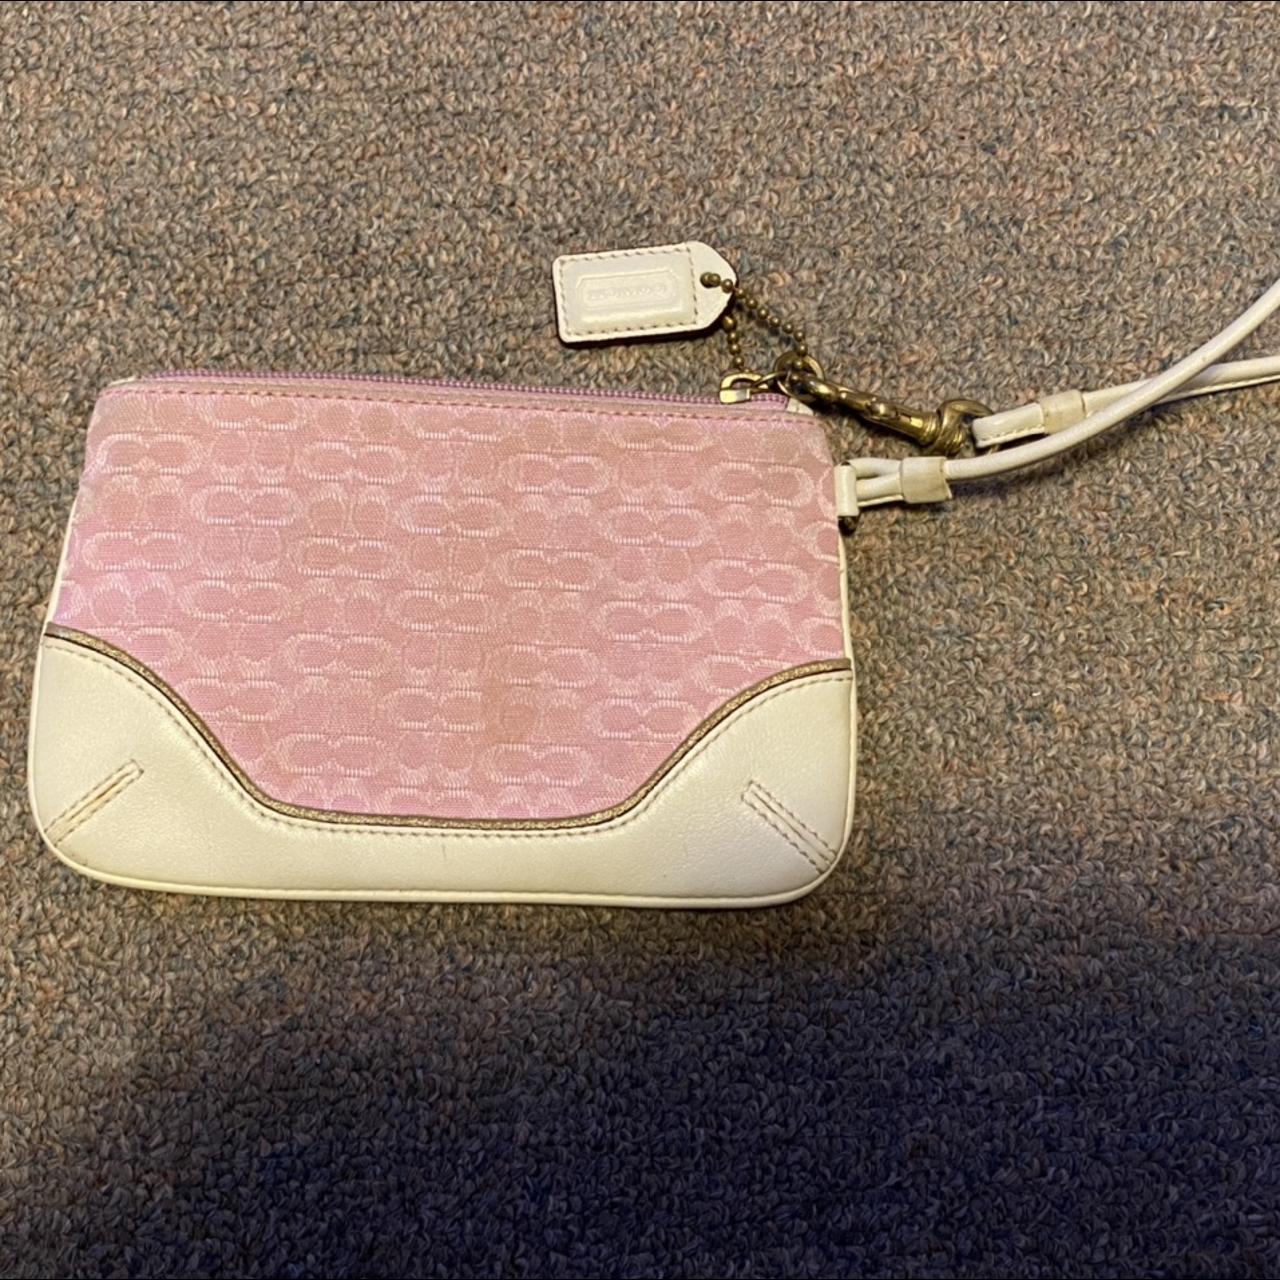 Item(s): 2005 Authentic quilted fuchsia pink Coach - Depop